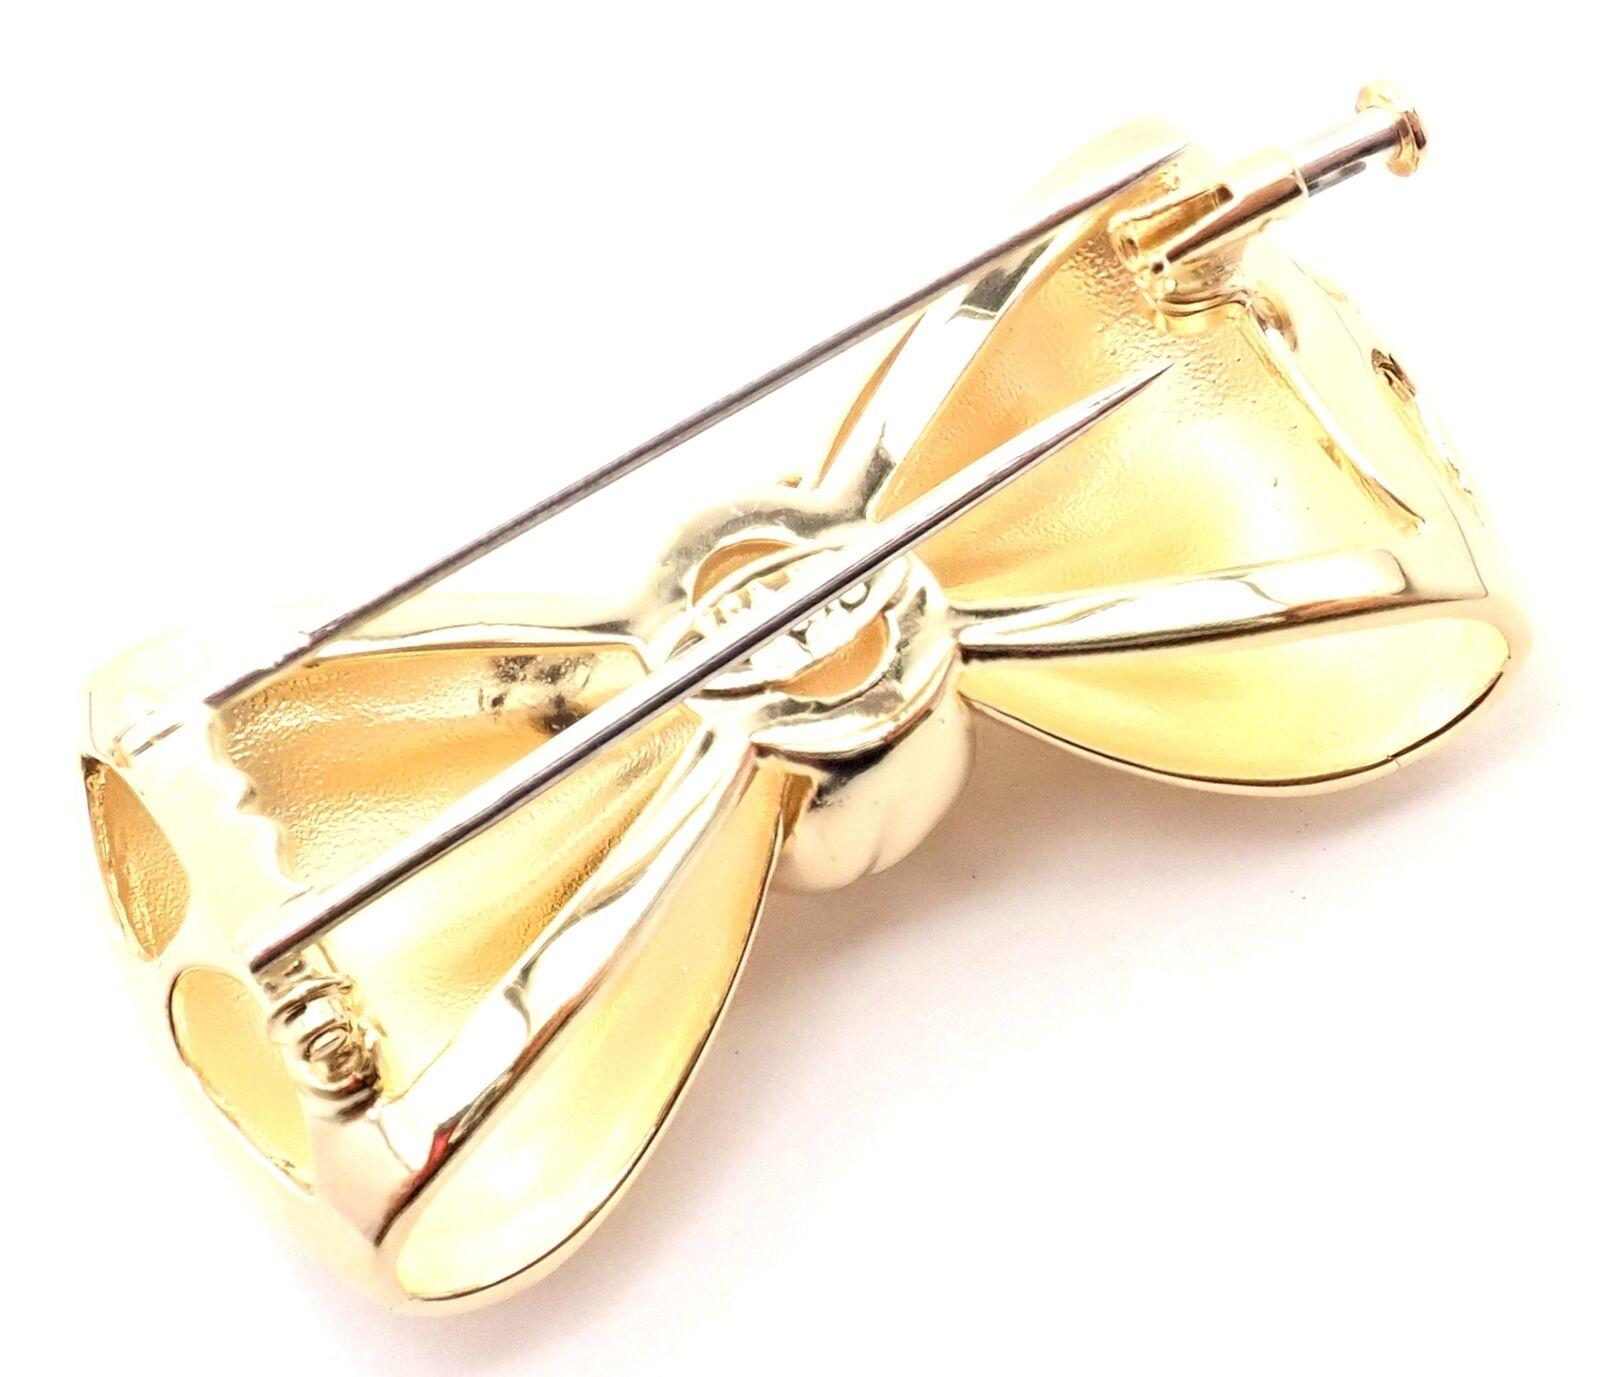 Vintage Van Cleef & Arpels Bow Design Yellow Gold Pin Brooch In Excellent Condition For Sale In Holland, PA